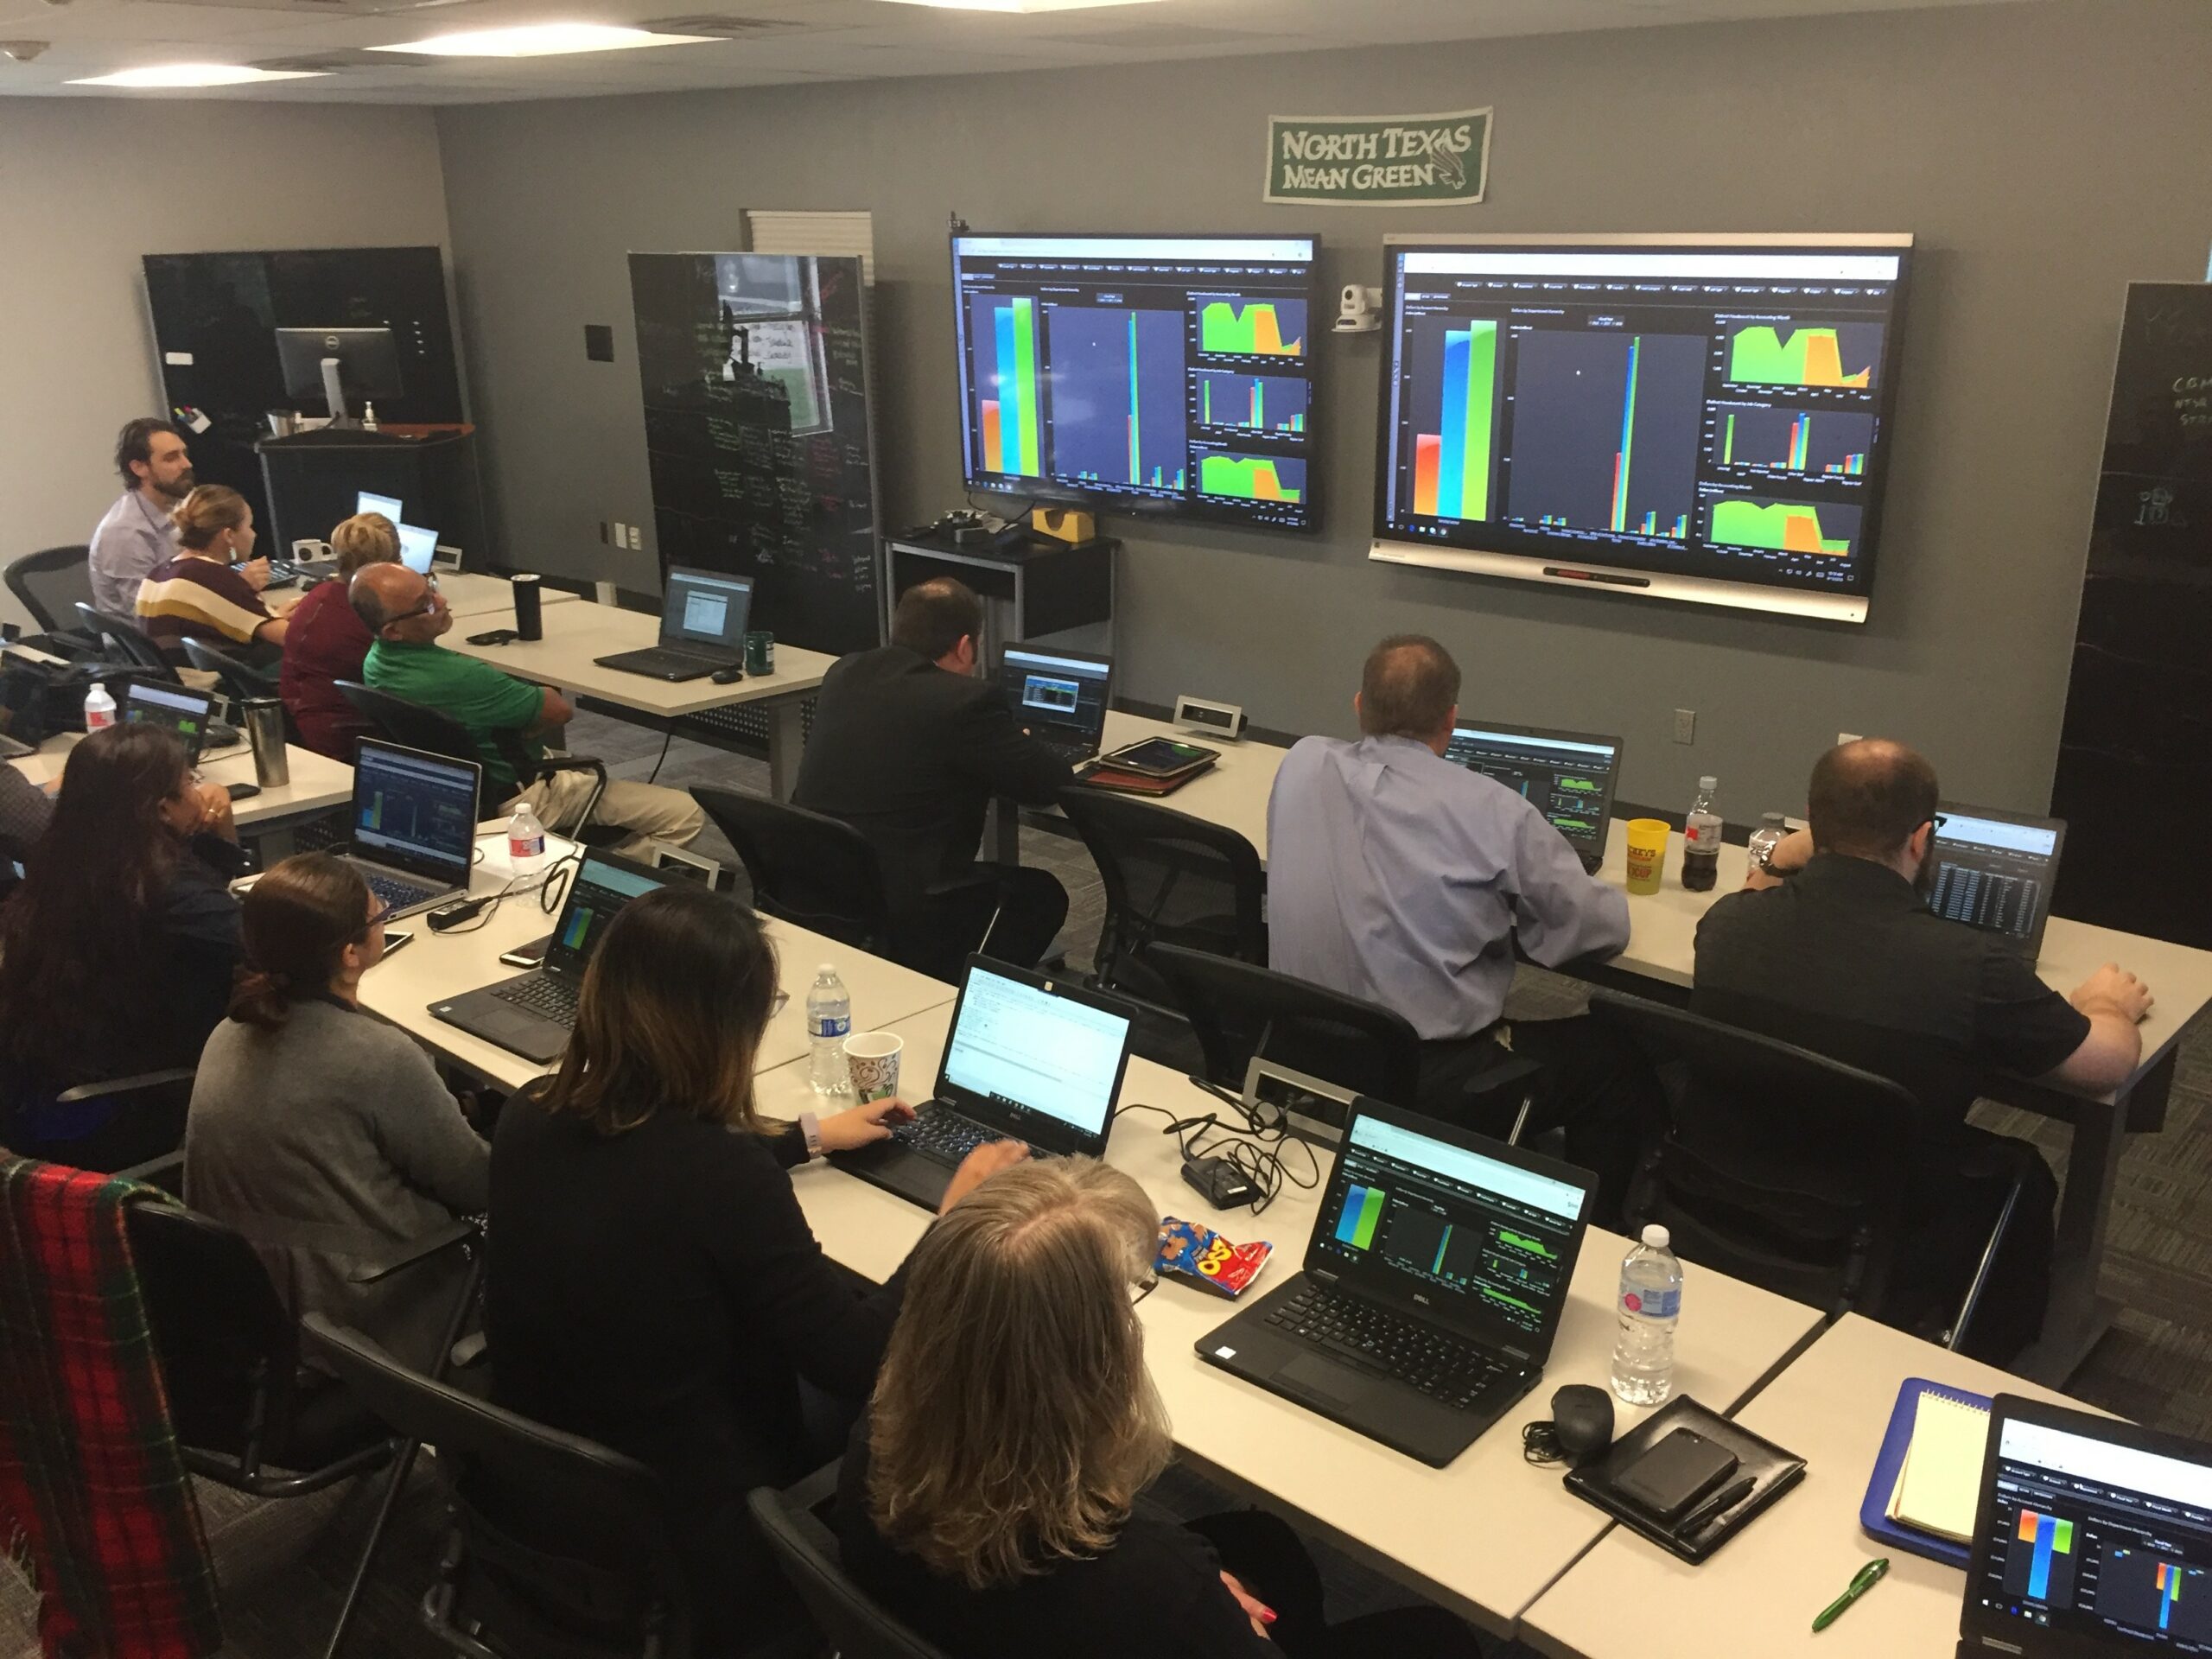 Data training—UNT administrators understanding data visualization tools has allowed them to more clearly understand four-year trends in drop, fail, withdraw and incomplete rates as well as patterns of success and struggle, broken down by majors and courses.